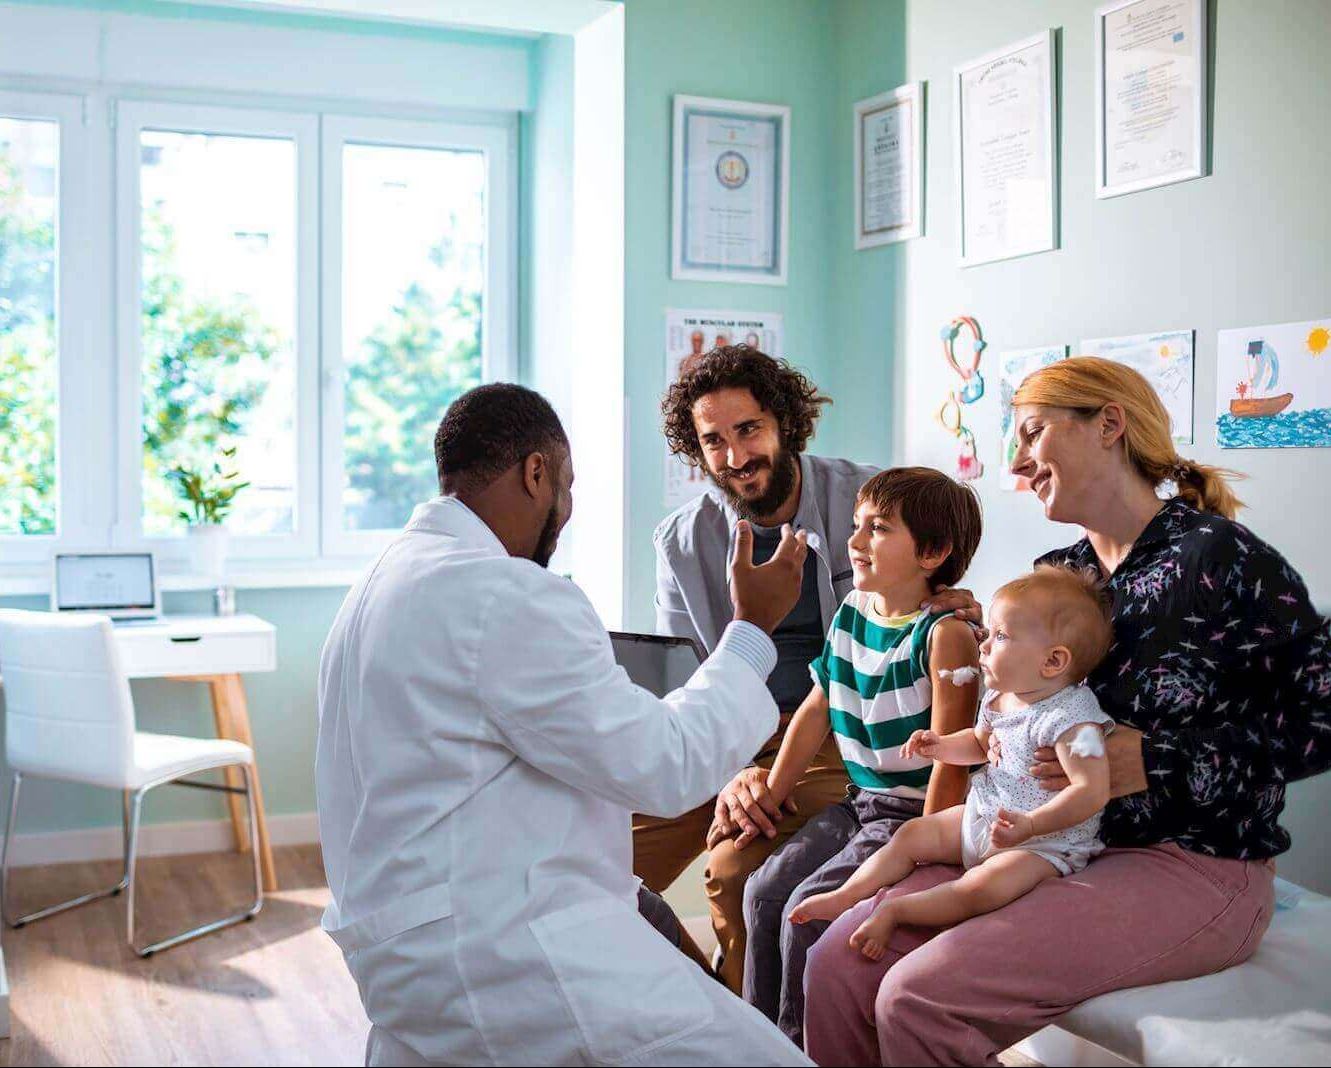 doctor provides a checkup on small child while family watches